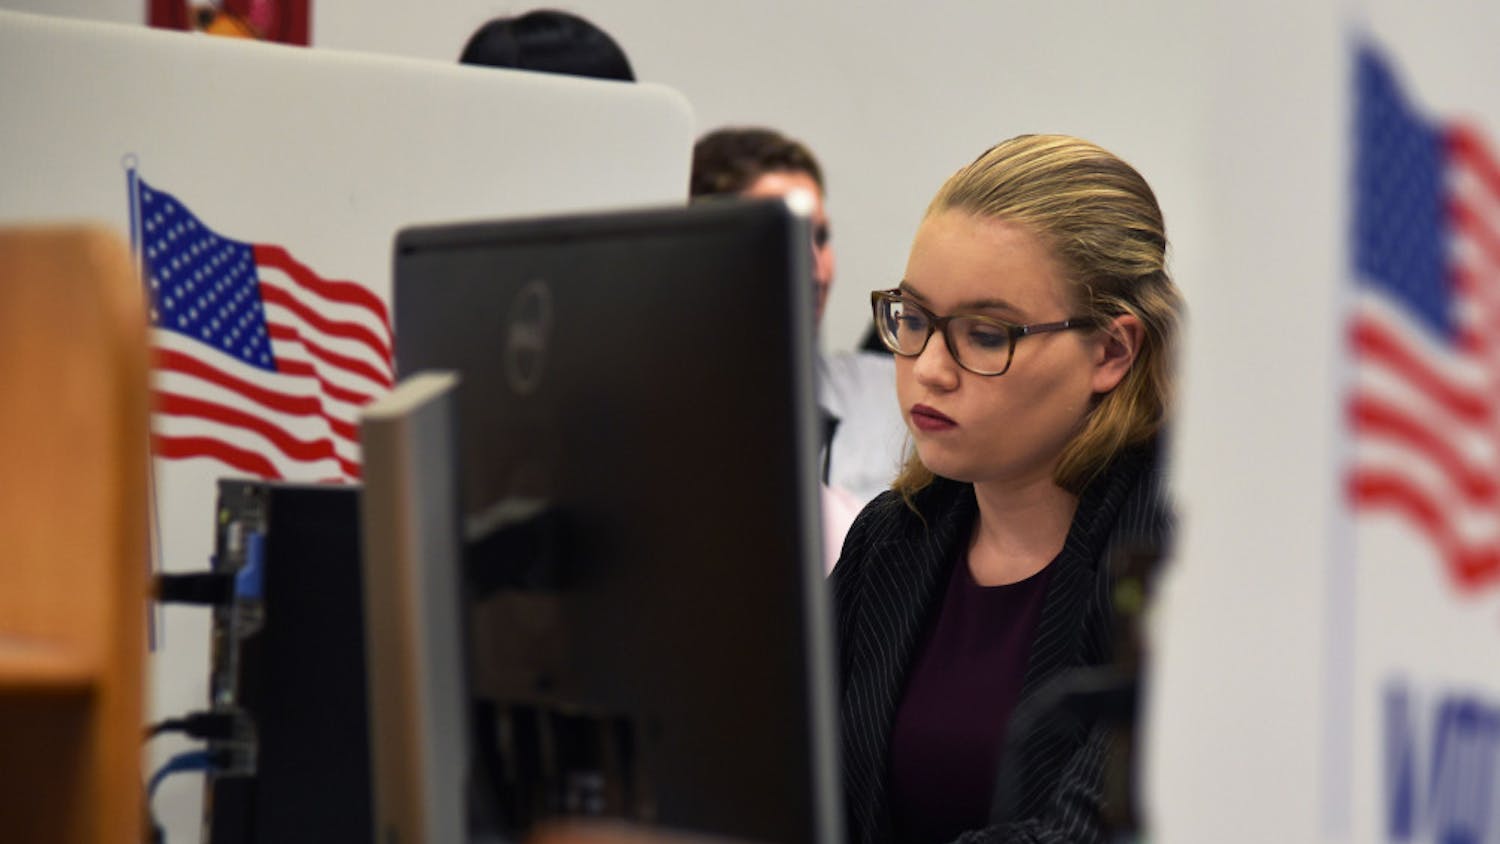 Olivia Dunbar, a 20-year-old computer engineering junior at UF, votes Tuesday in the fall student government election at the Marston Library.